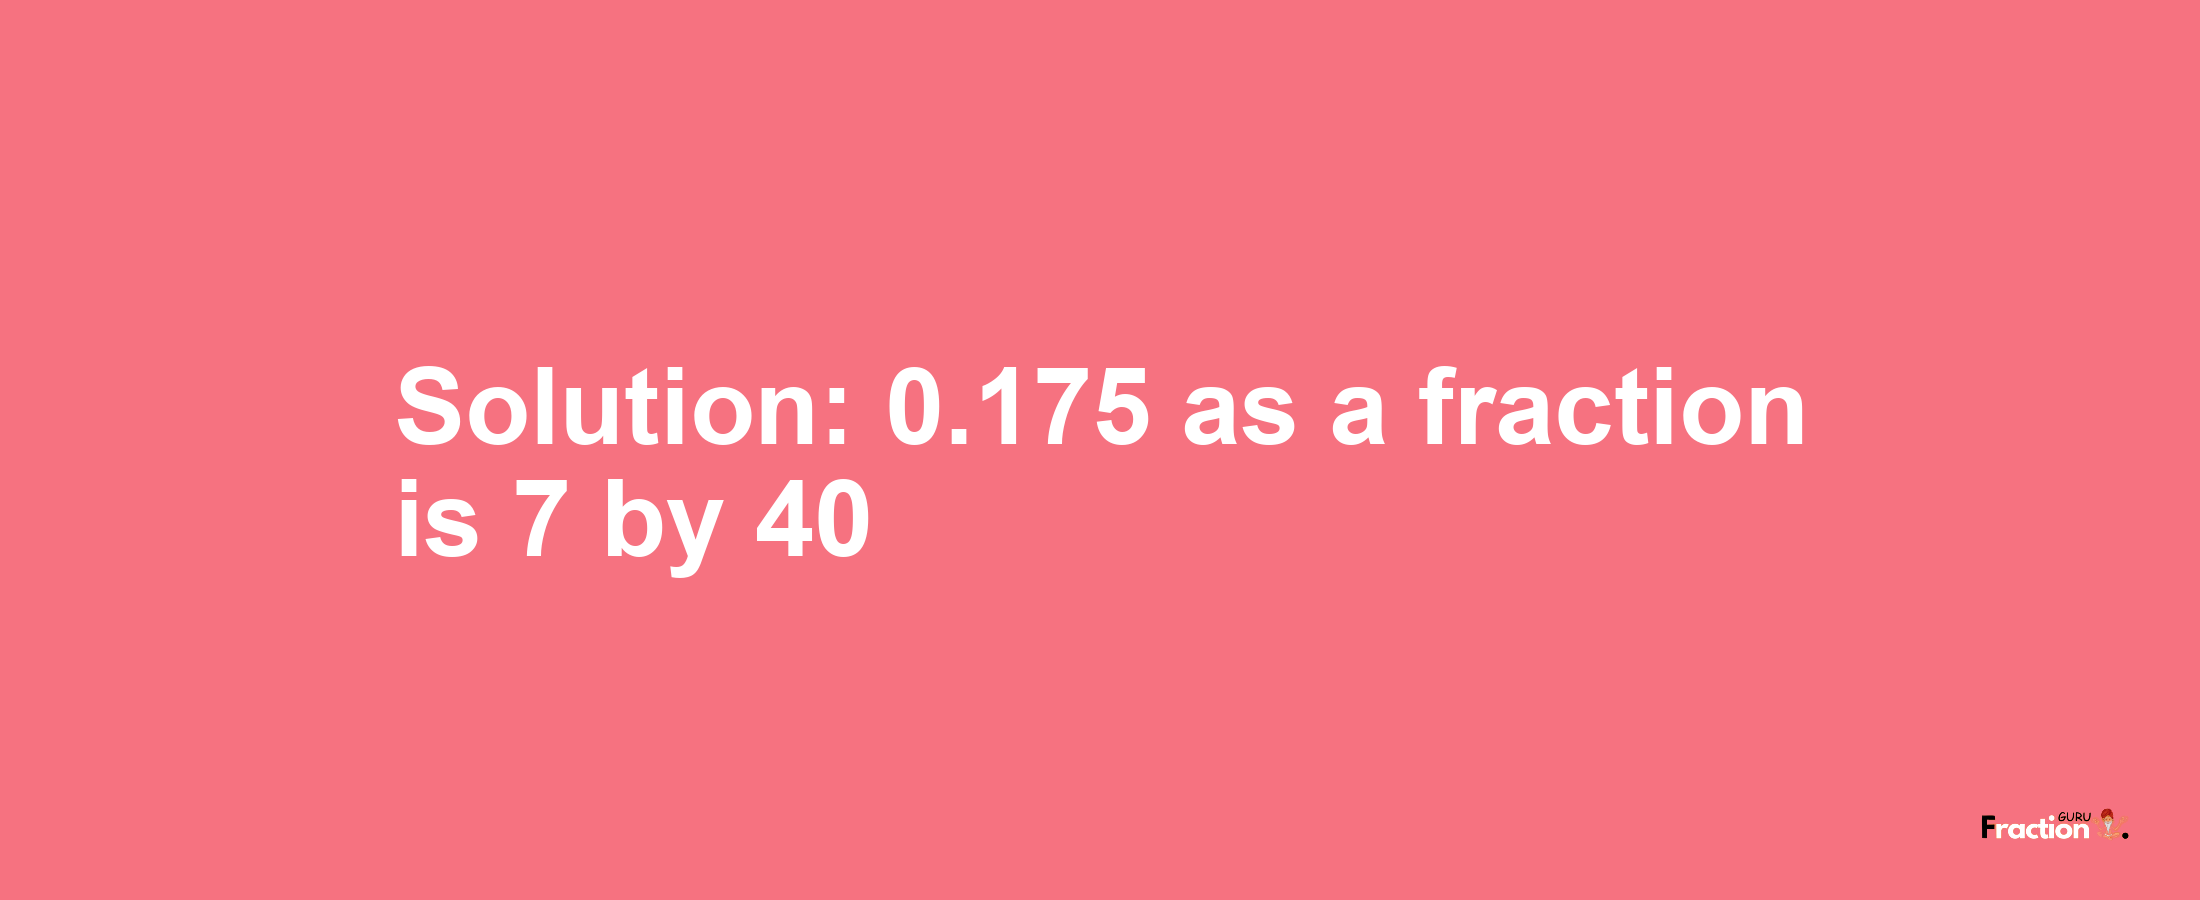 Solution:0.175 as a fraction is 7/40